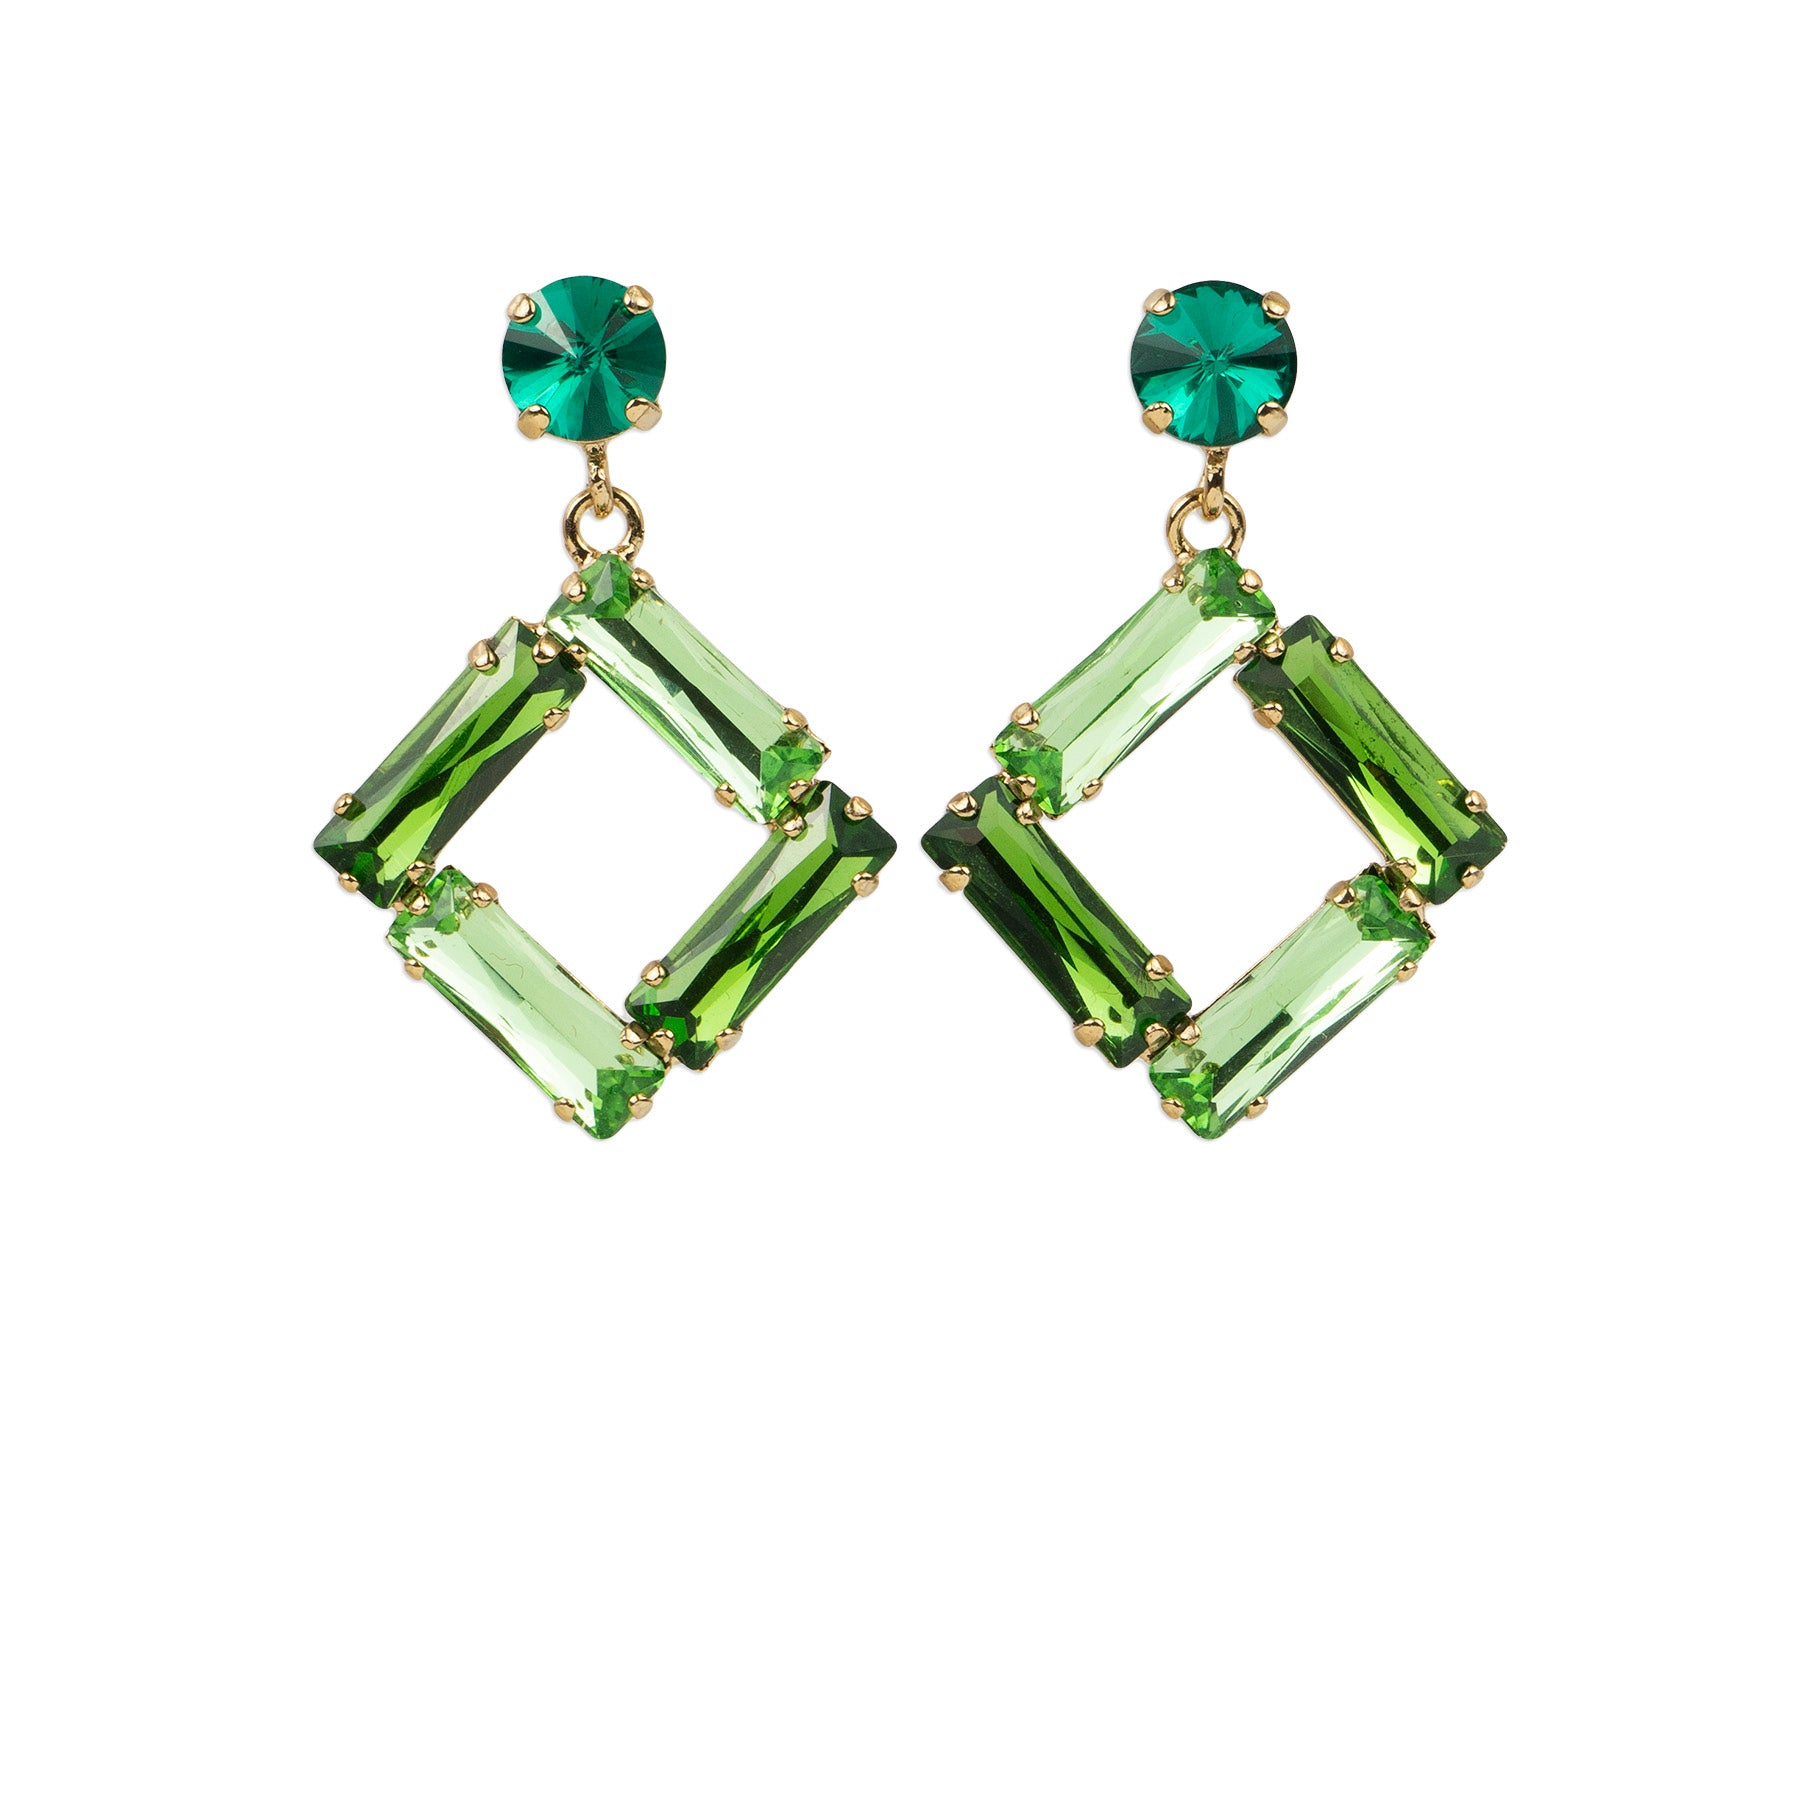 Square drop earrings with crystal baguettes